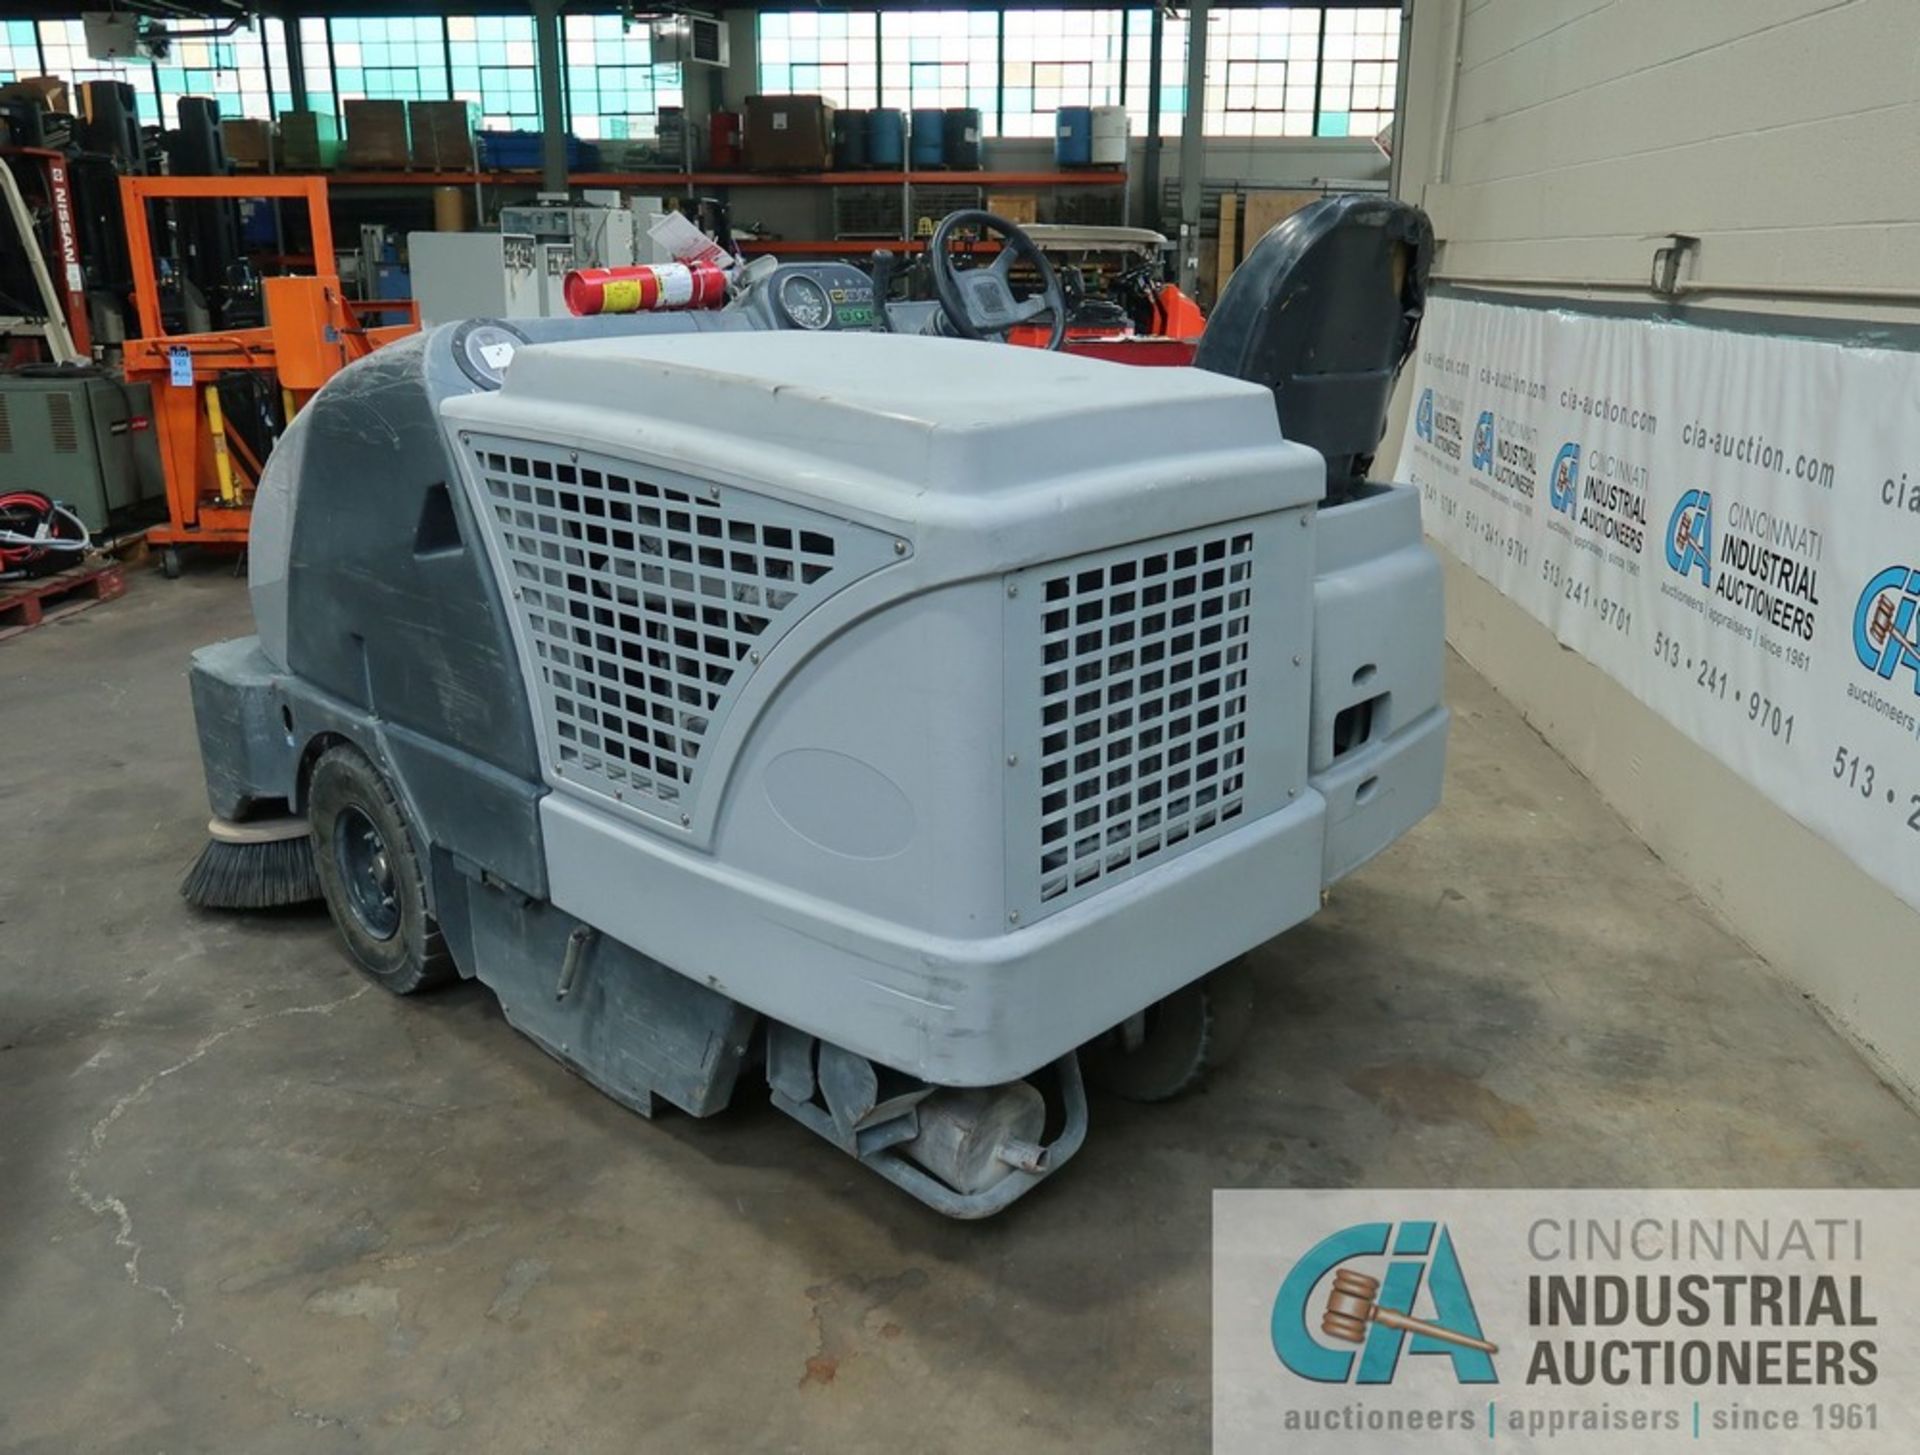 2018 ADVANCE MODEL SW8000 LP GAS FLOOR SWEEPER; S/N 1000064177, 2,902 HOURS SHOWING - Image 3 of 12